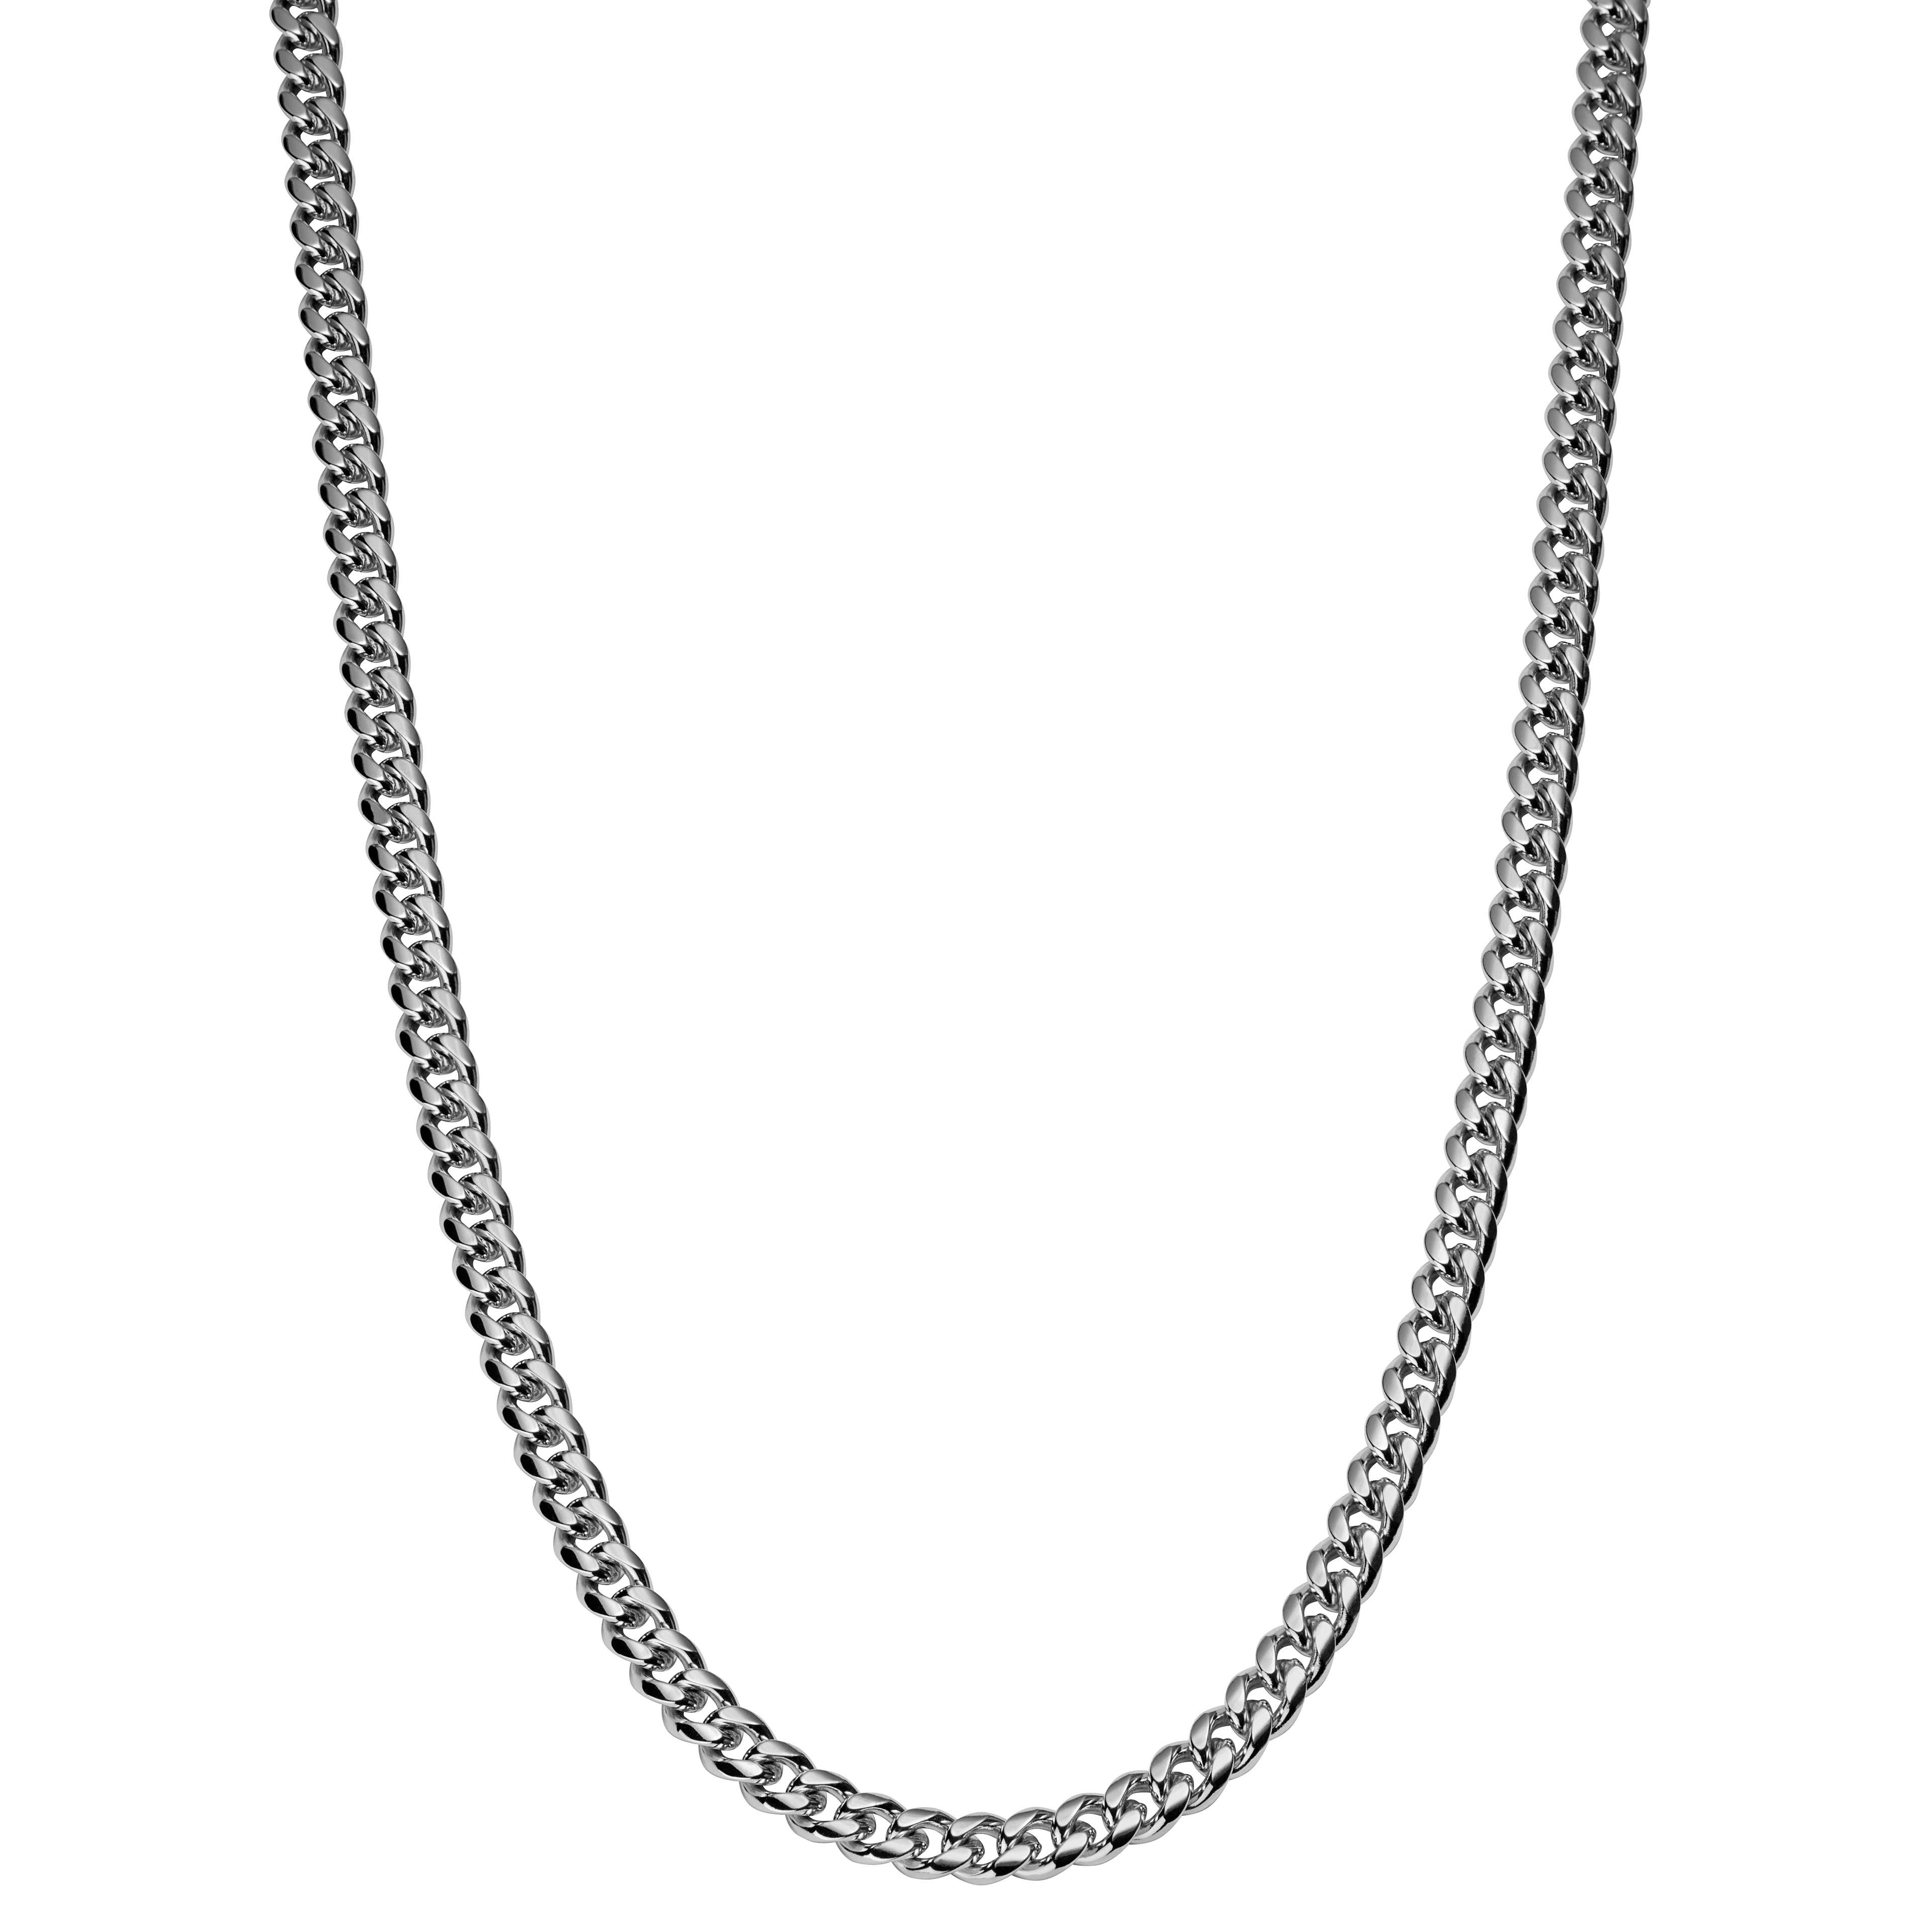 6mm Silver-Tone Chain Necklace